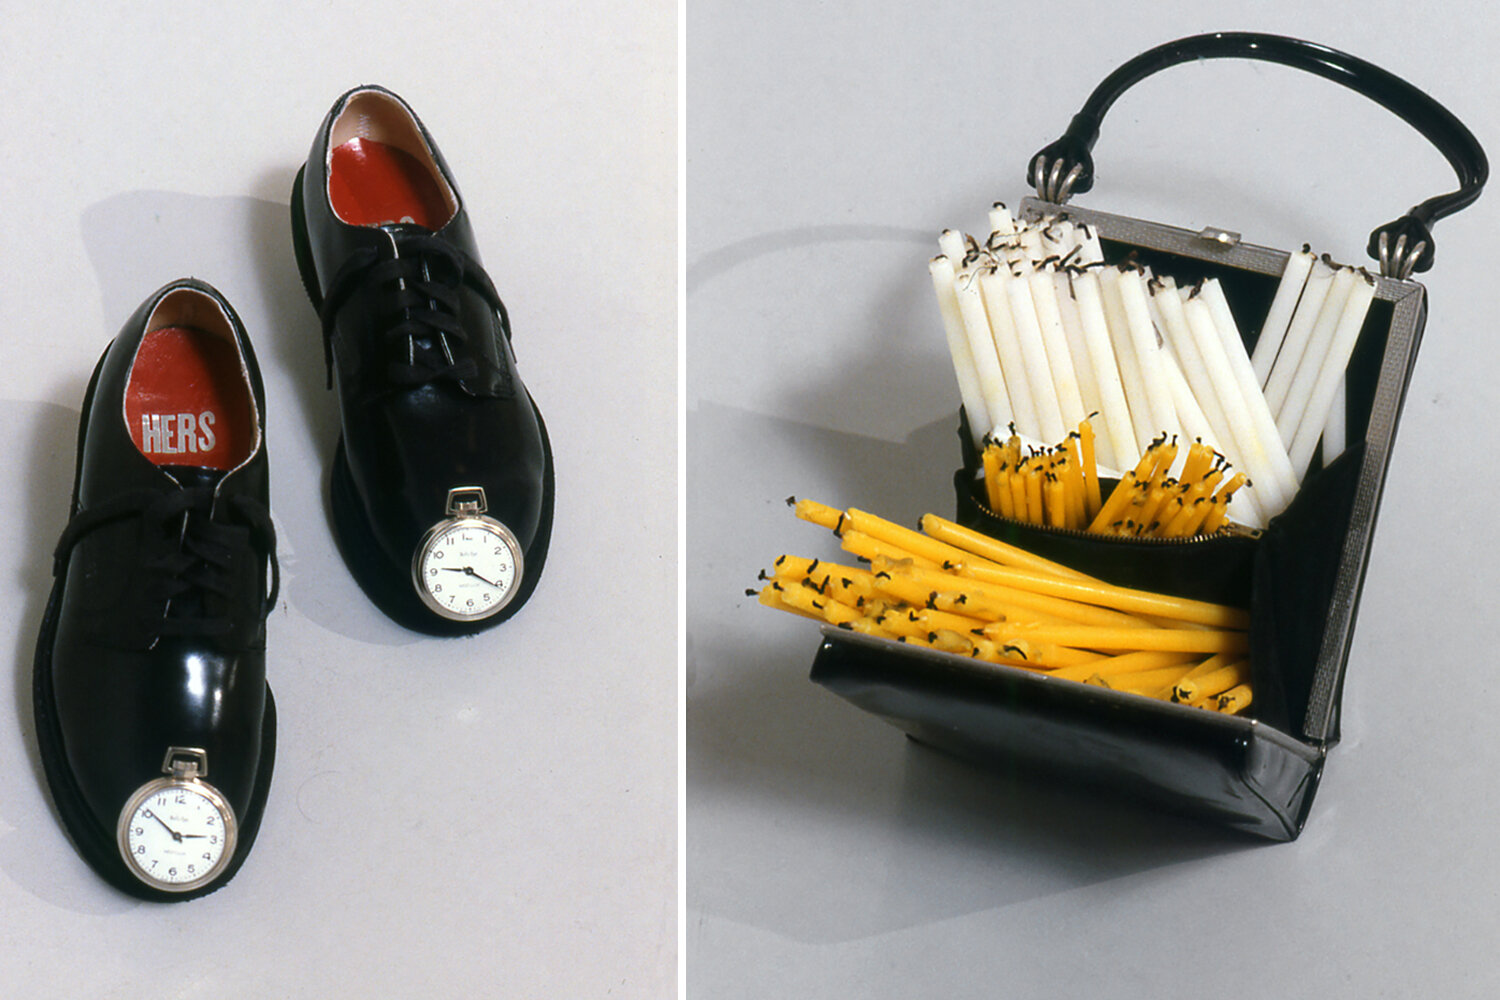   Measuring With Eyes and Feet: Compass &nbsp; shoes and Purse  1991. Photo: B.T. Martin 